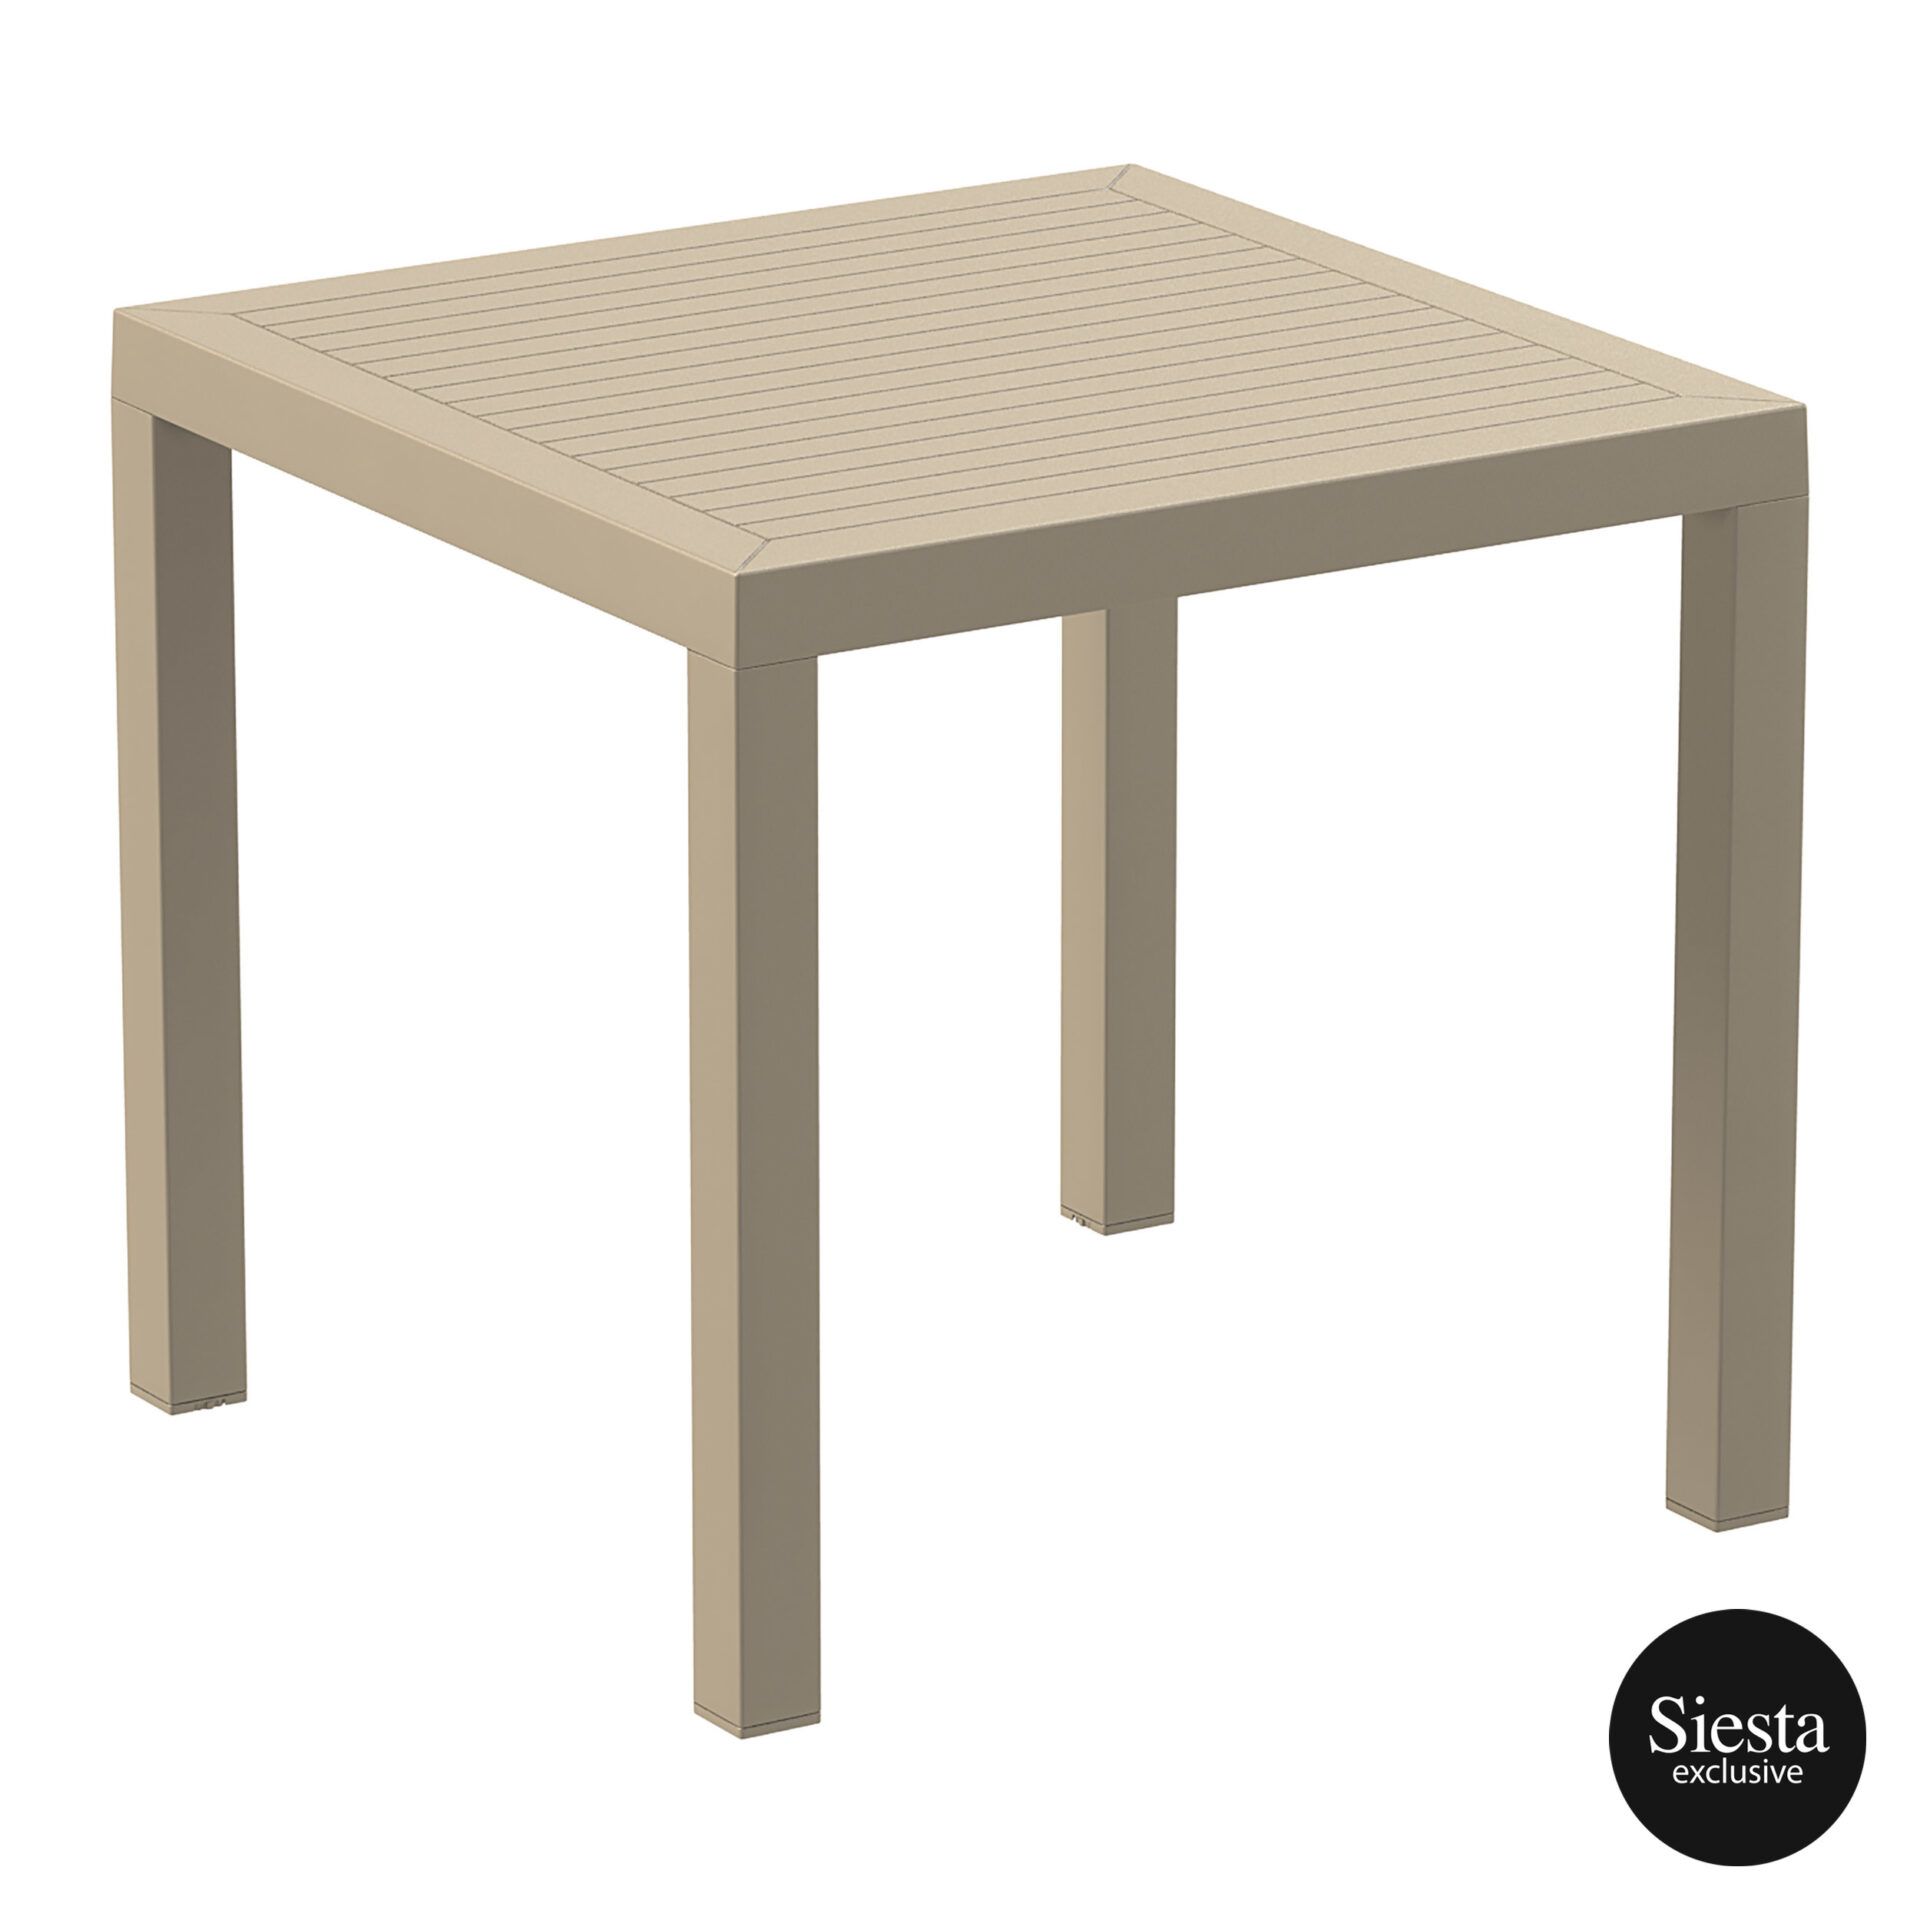 Ares 80 Table - Taupe